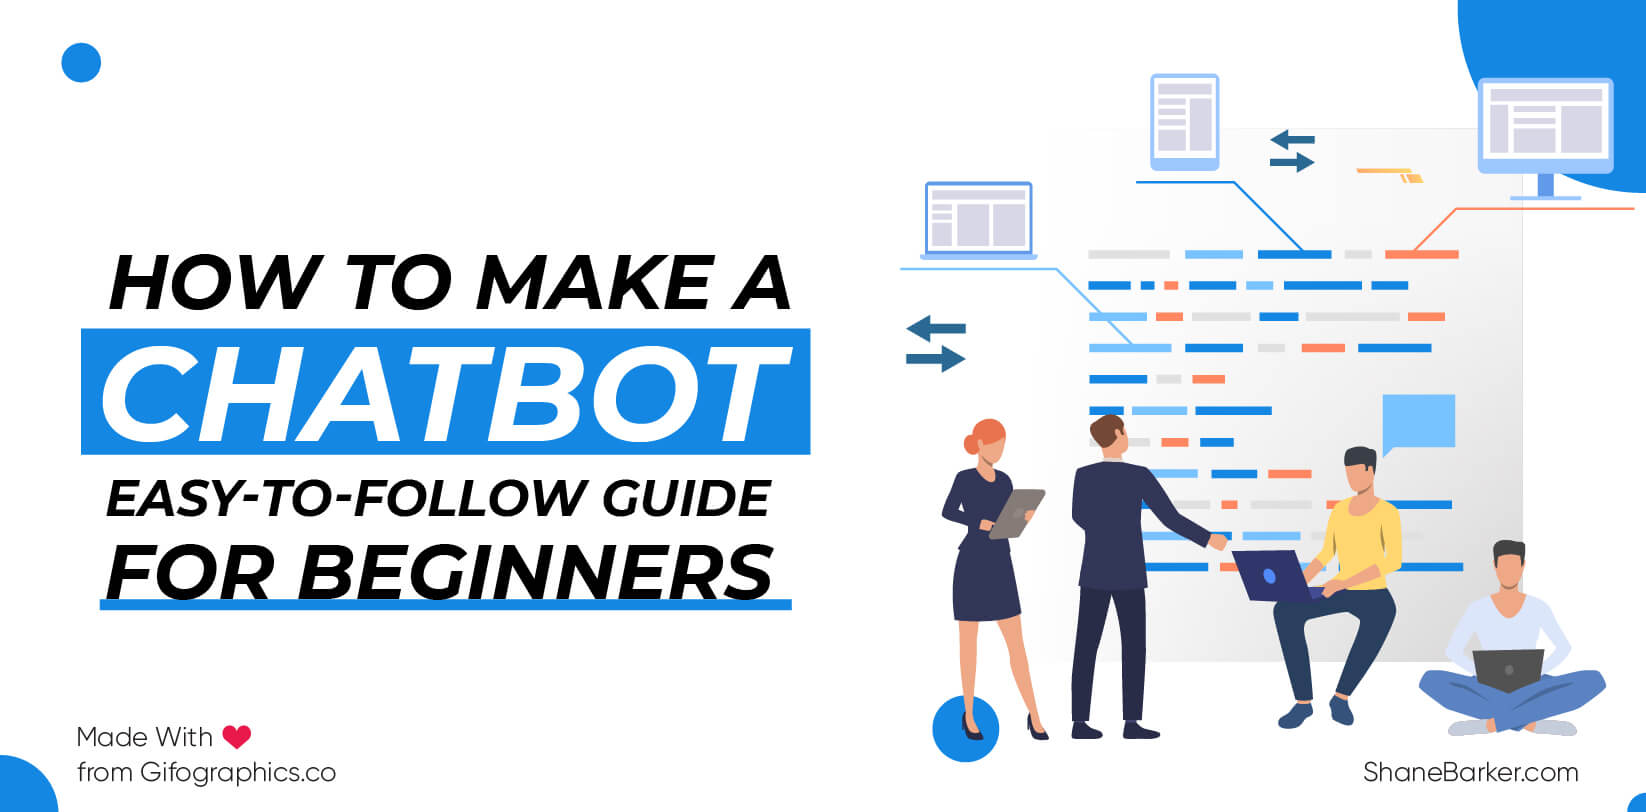 How to Make a Chatbot Easy-to-Follow Guide for Beginners